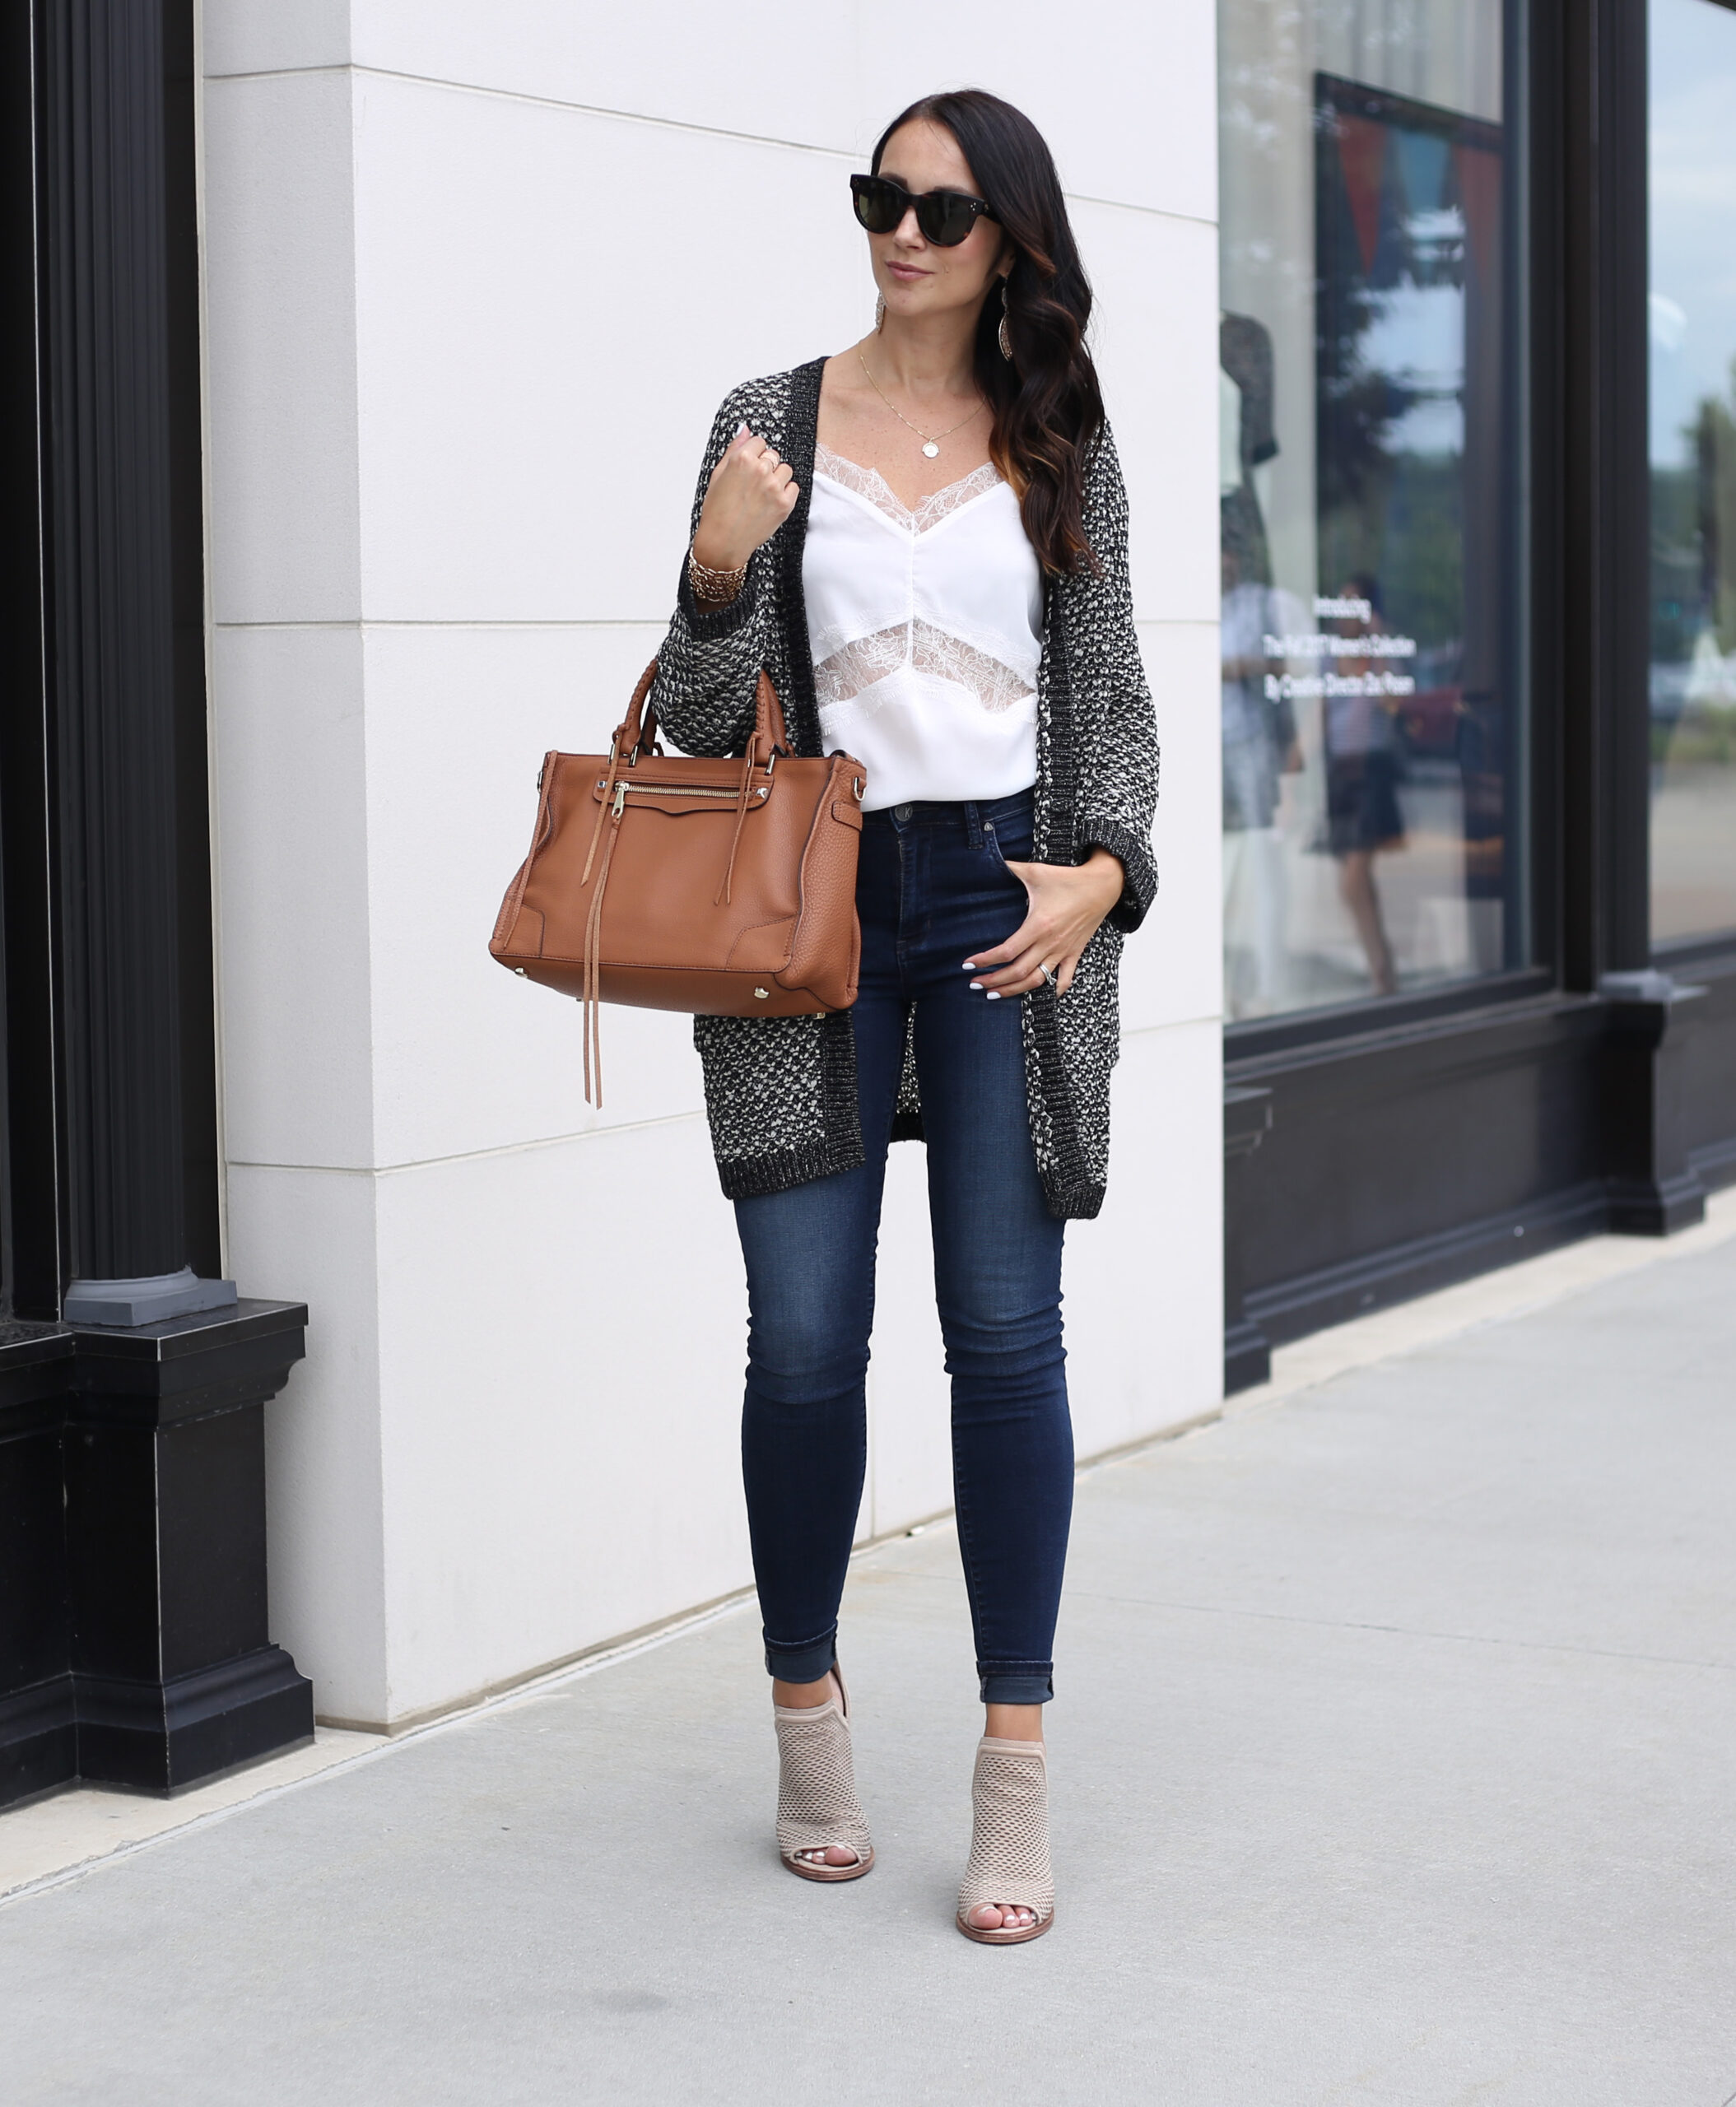 fashion blogger Anna Monteiro of blushing rose style wearing perfect fall cardigans and rebecaa minkoff regan satchel from nordstrom